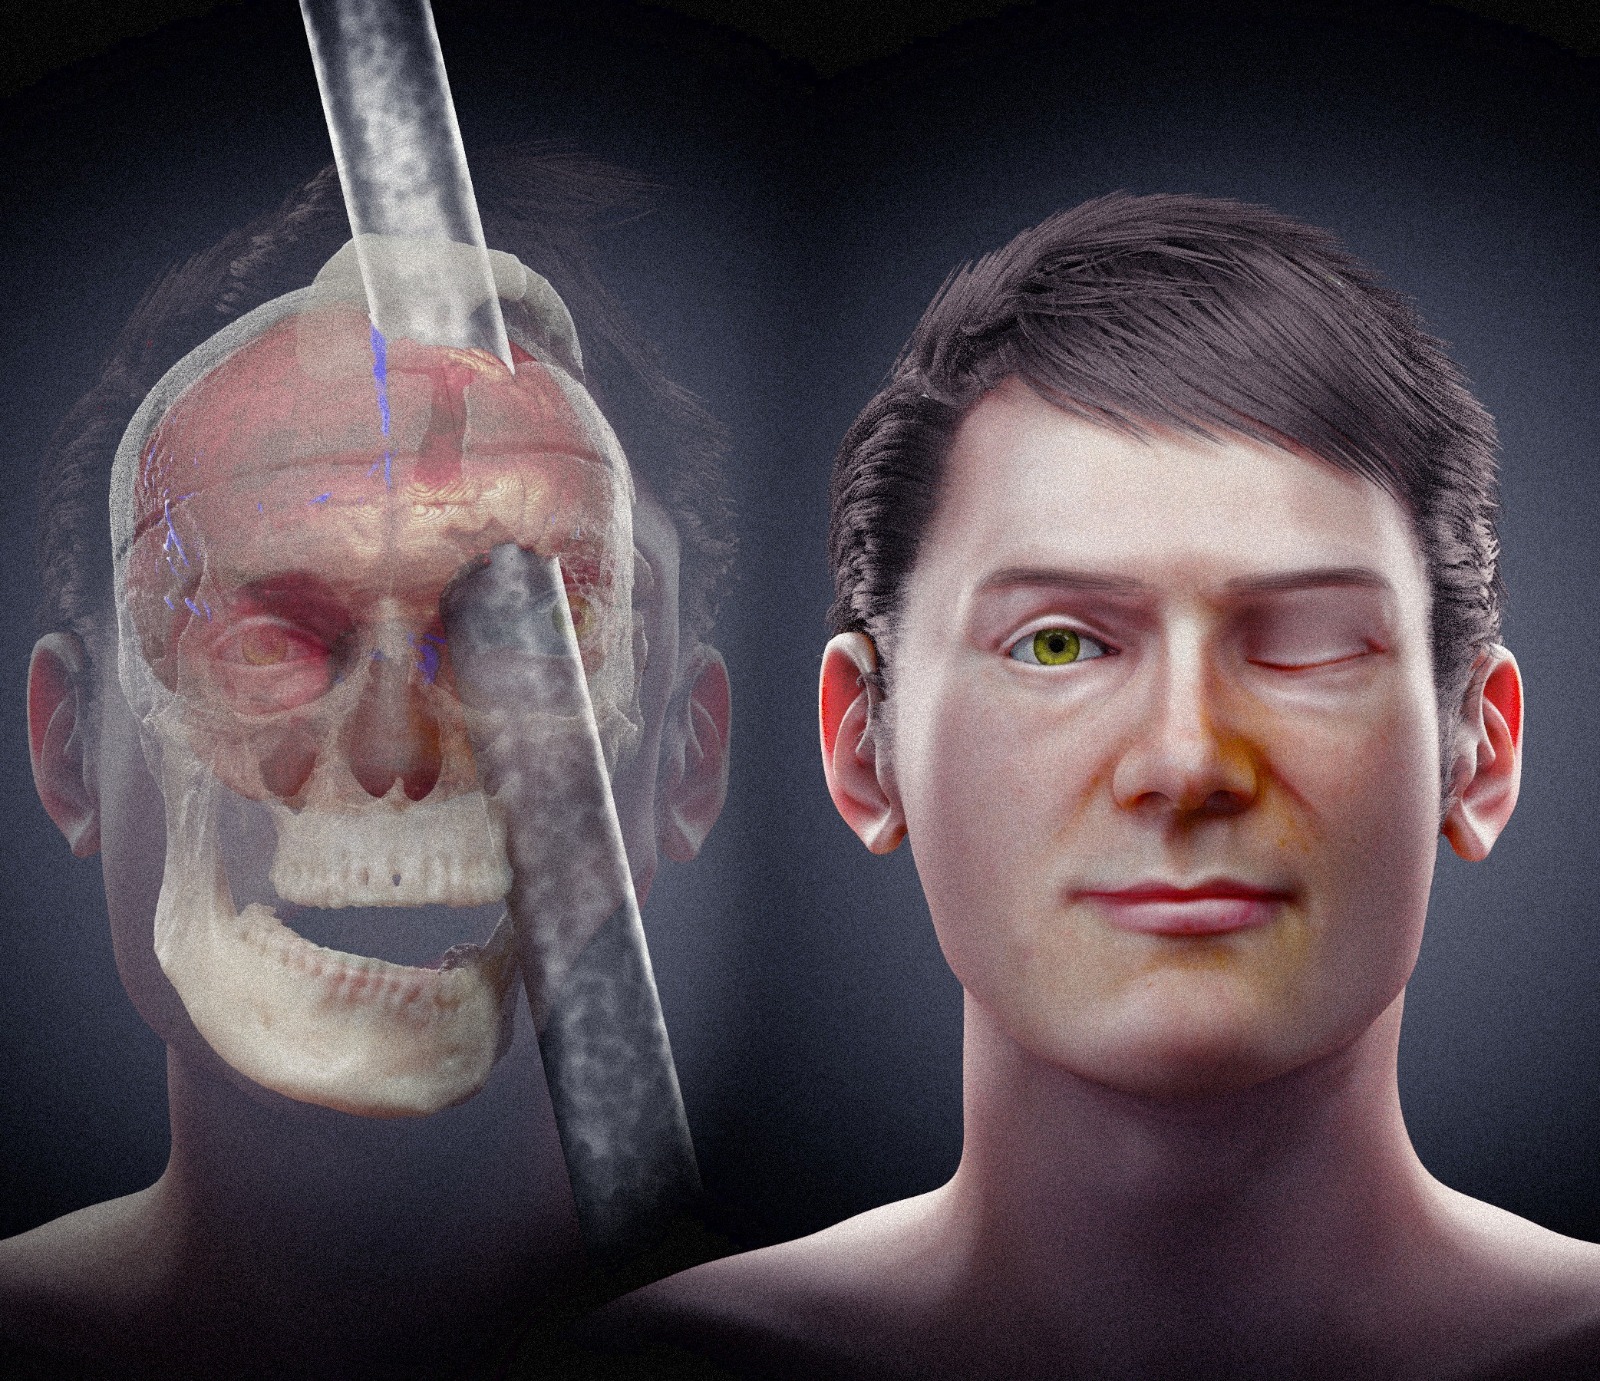 Scientists reconstruct the face of the man who had an iron rod incident